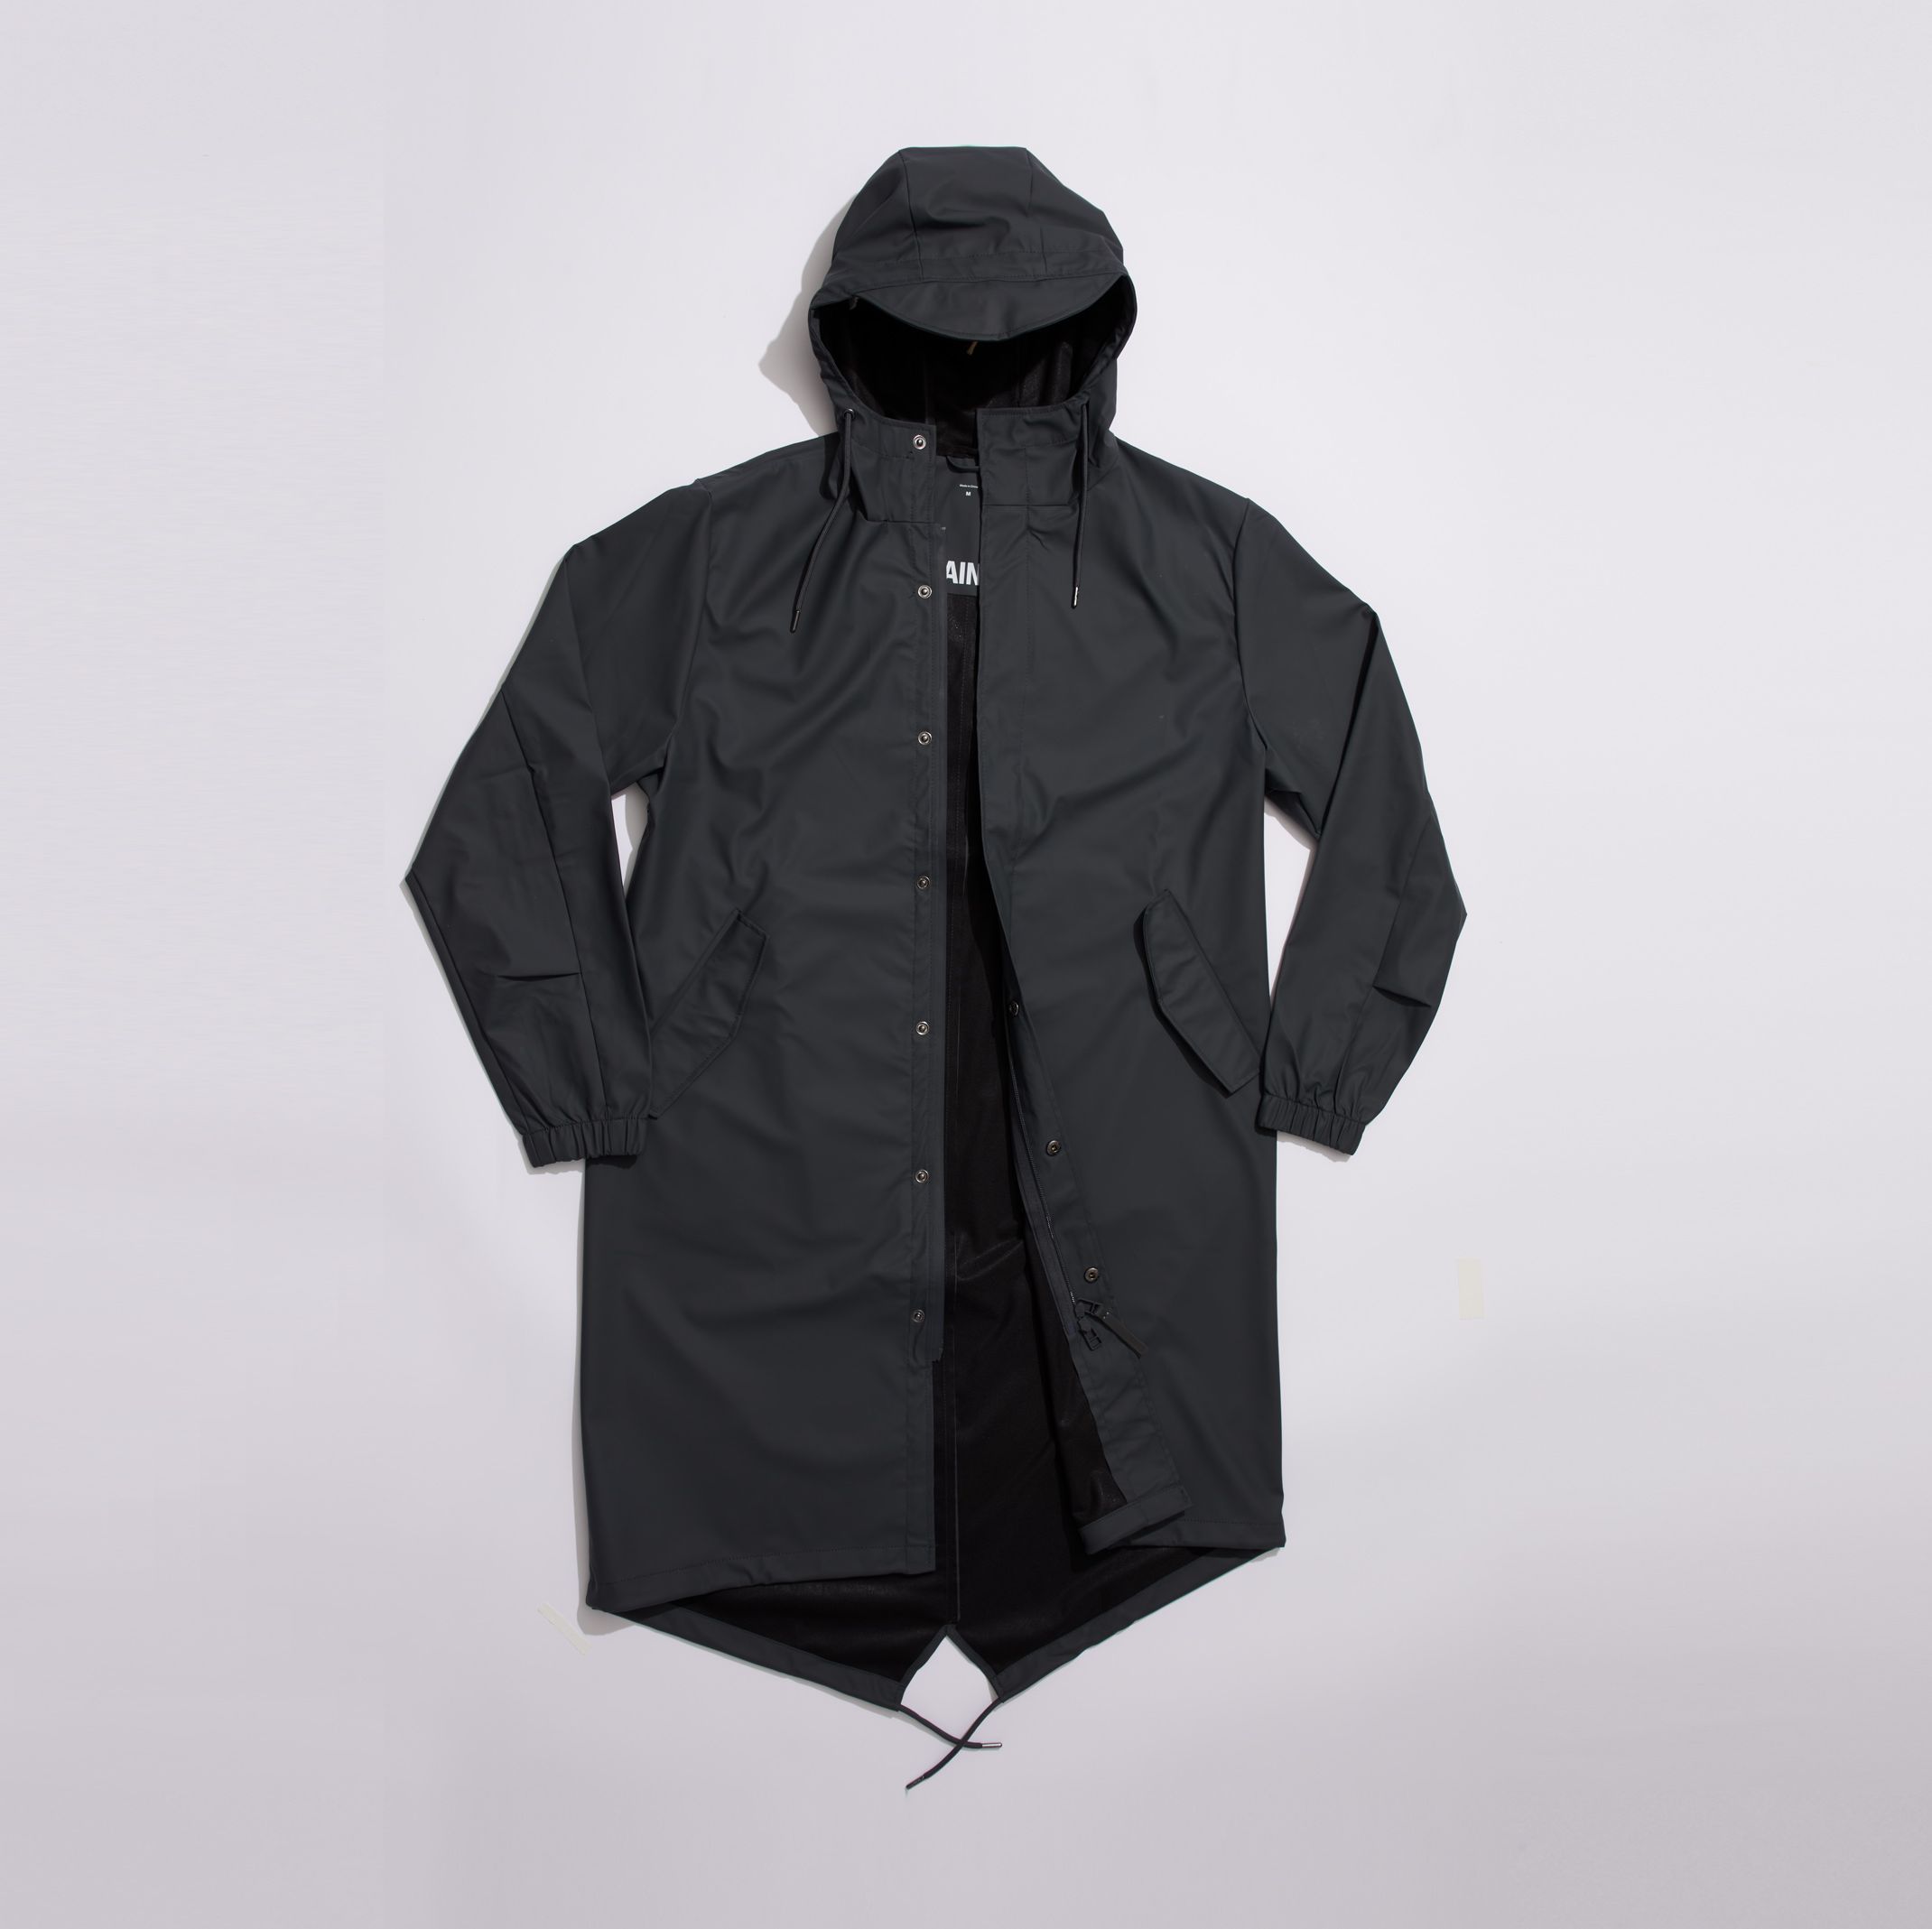 The Sleek Raincoat That'll Have You Hoping for Spring Showers